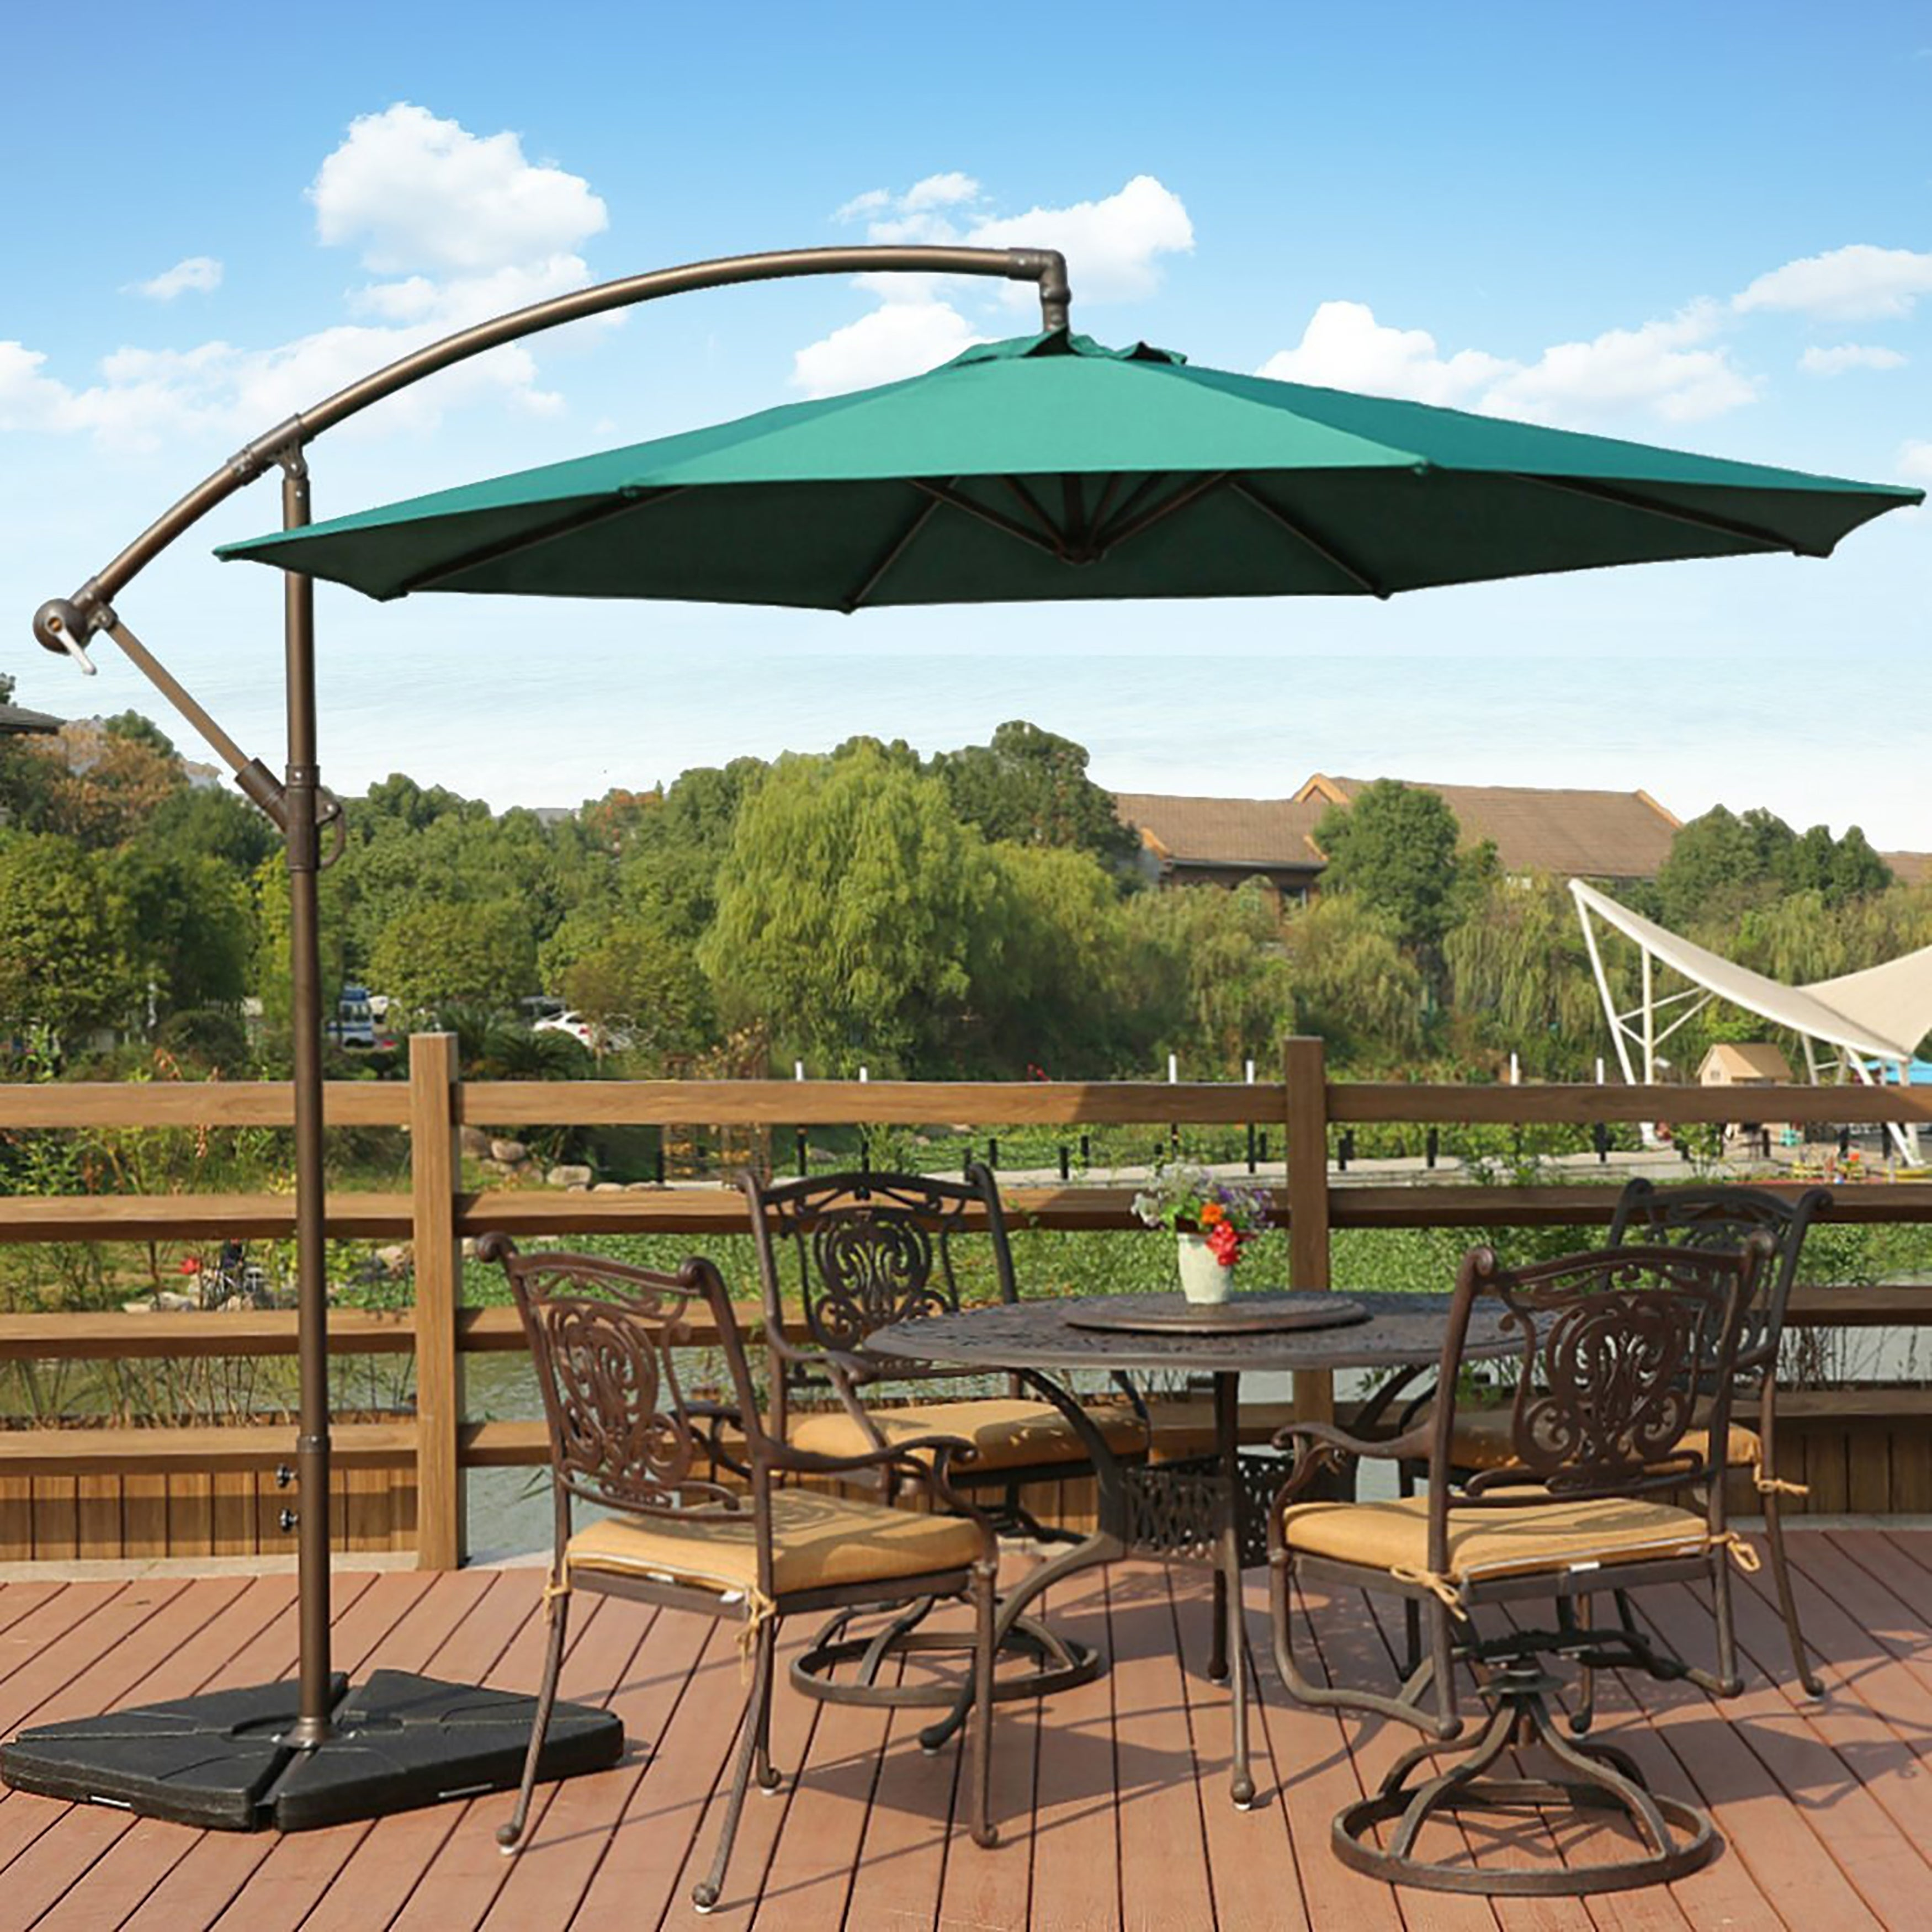 Weller 10 Ft Offset Cantilever Hanging Patio Umbrella intended for size 3500 X 3500